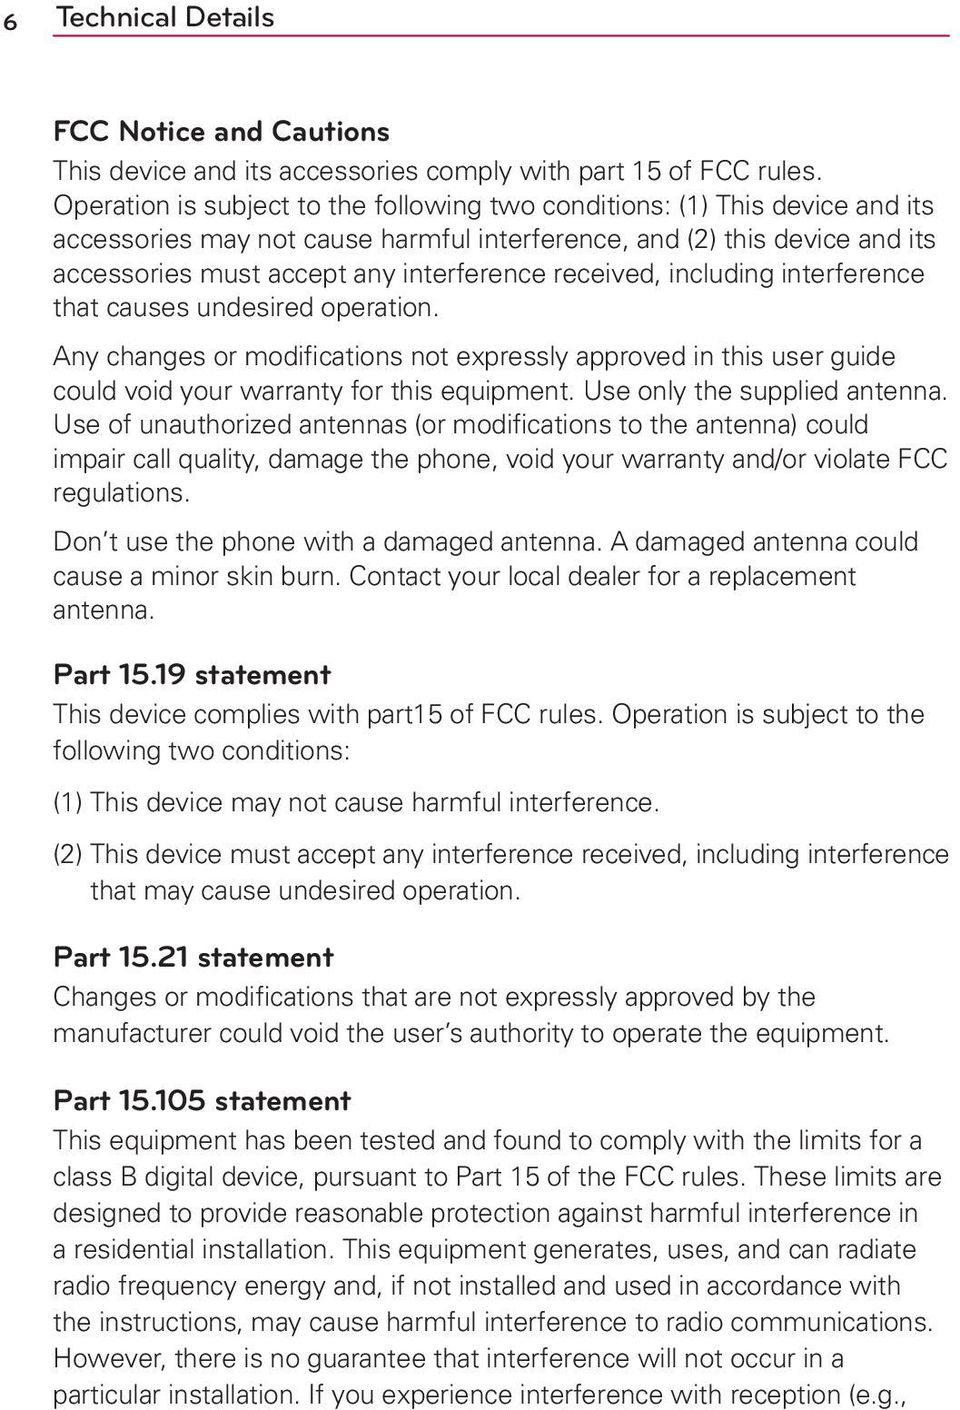 received, including interference that causes undesired operation. Any changes or modifications not expressly approved in this user guide could void your warranty for this equipment.